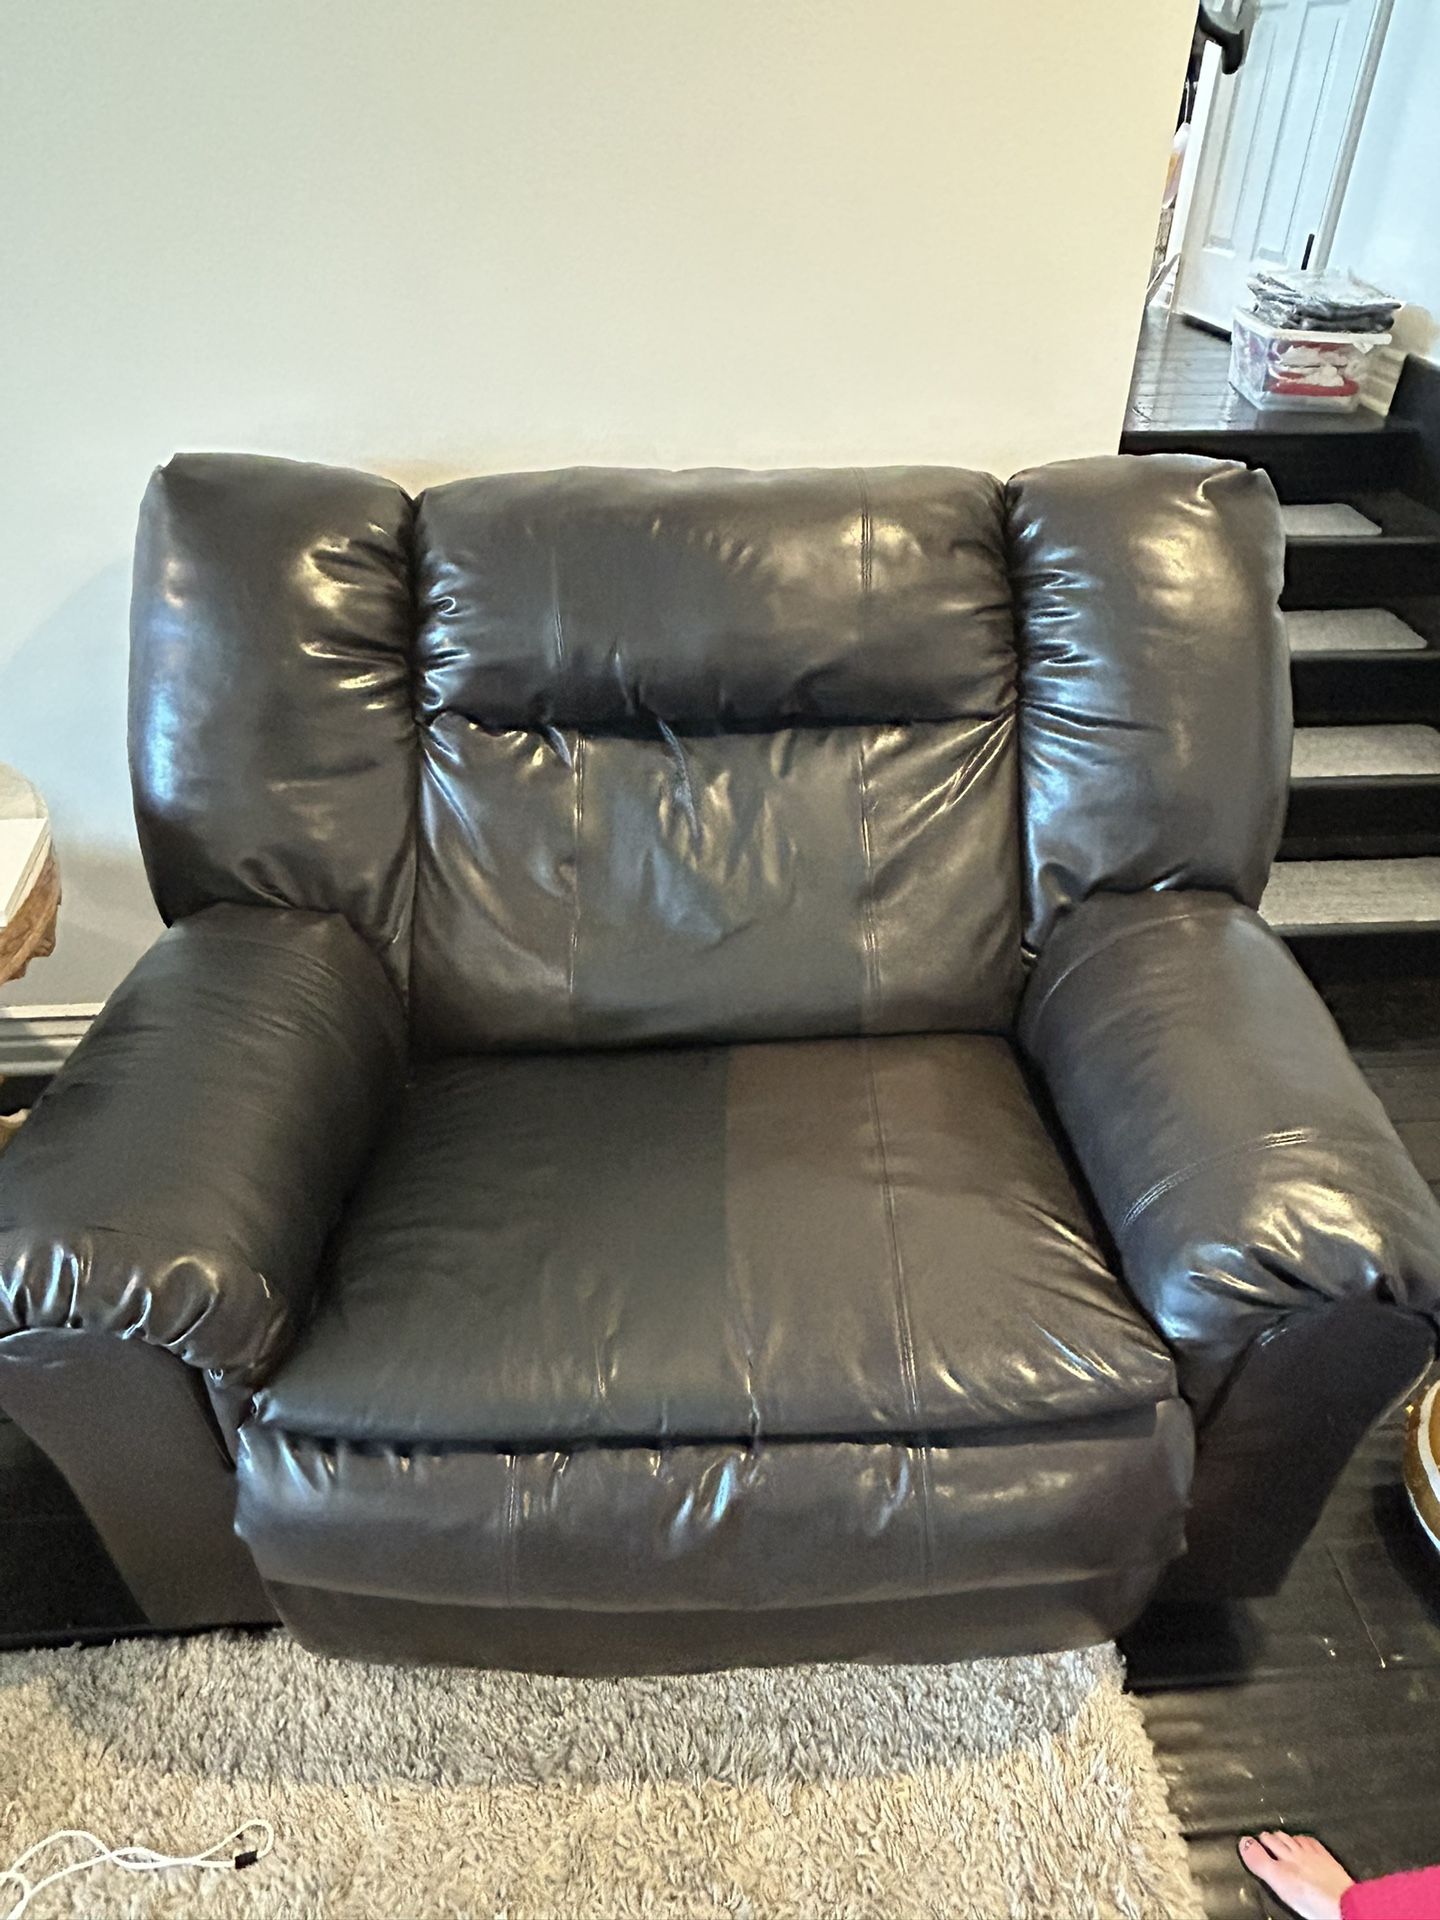 FREE- Oversized Cuddle Couch Recliner 